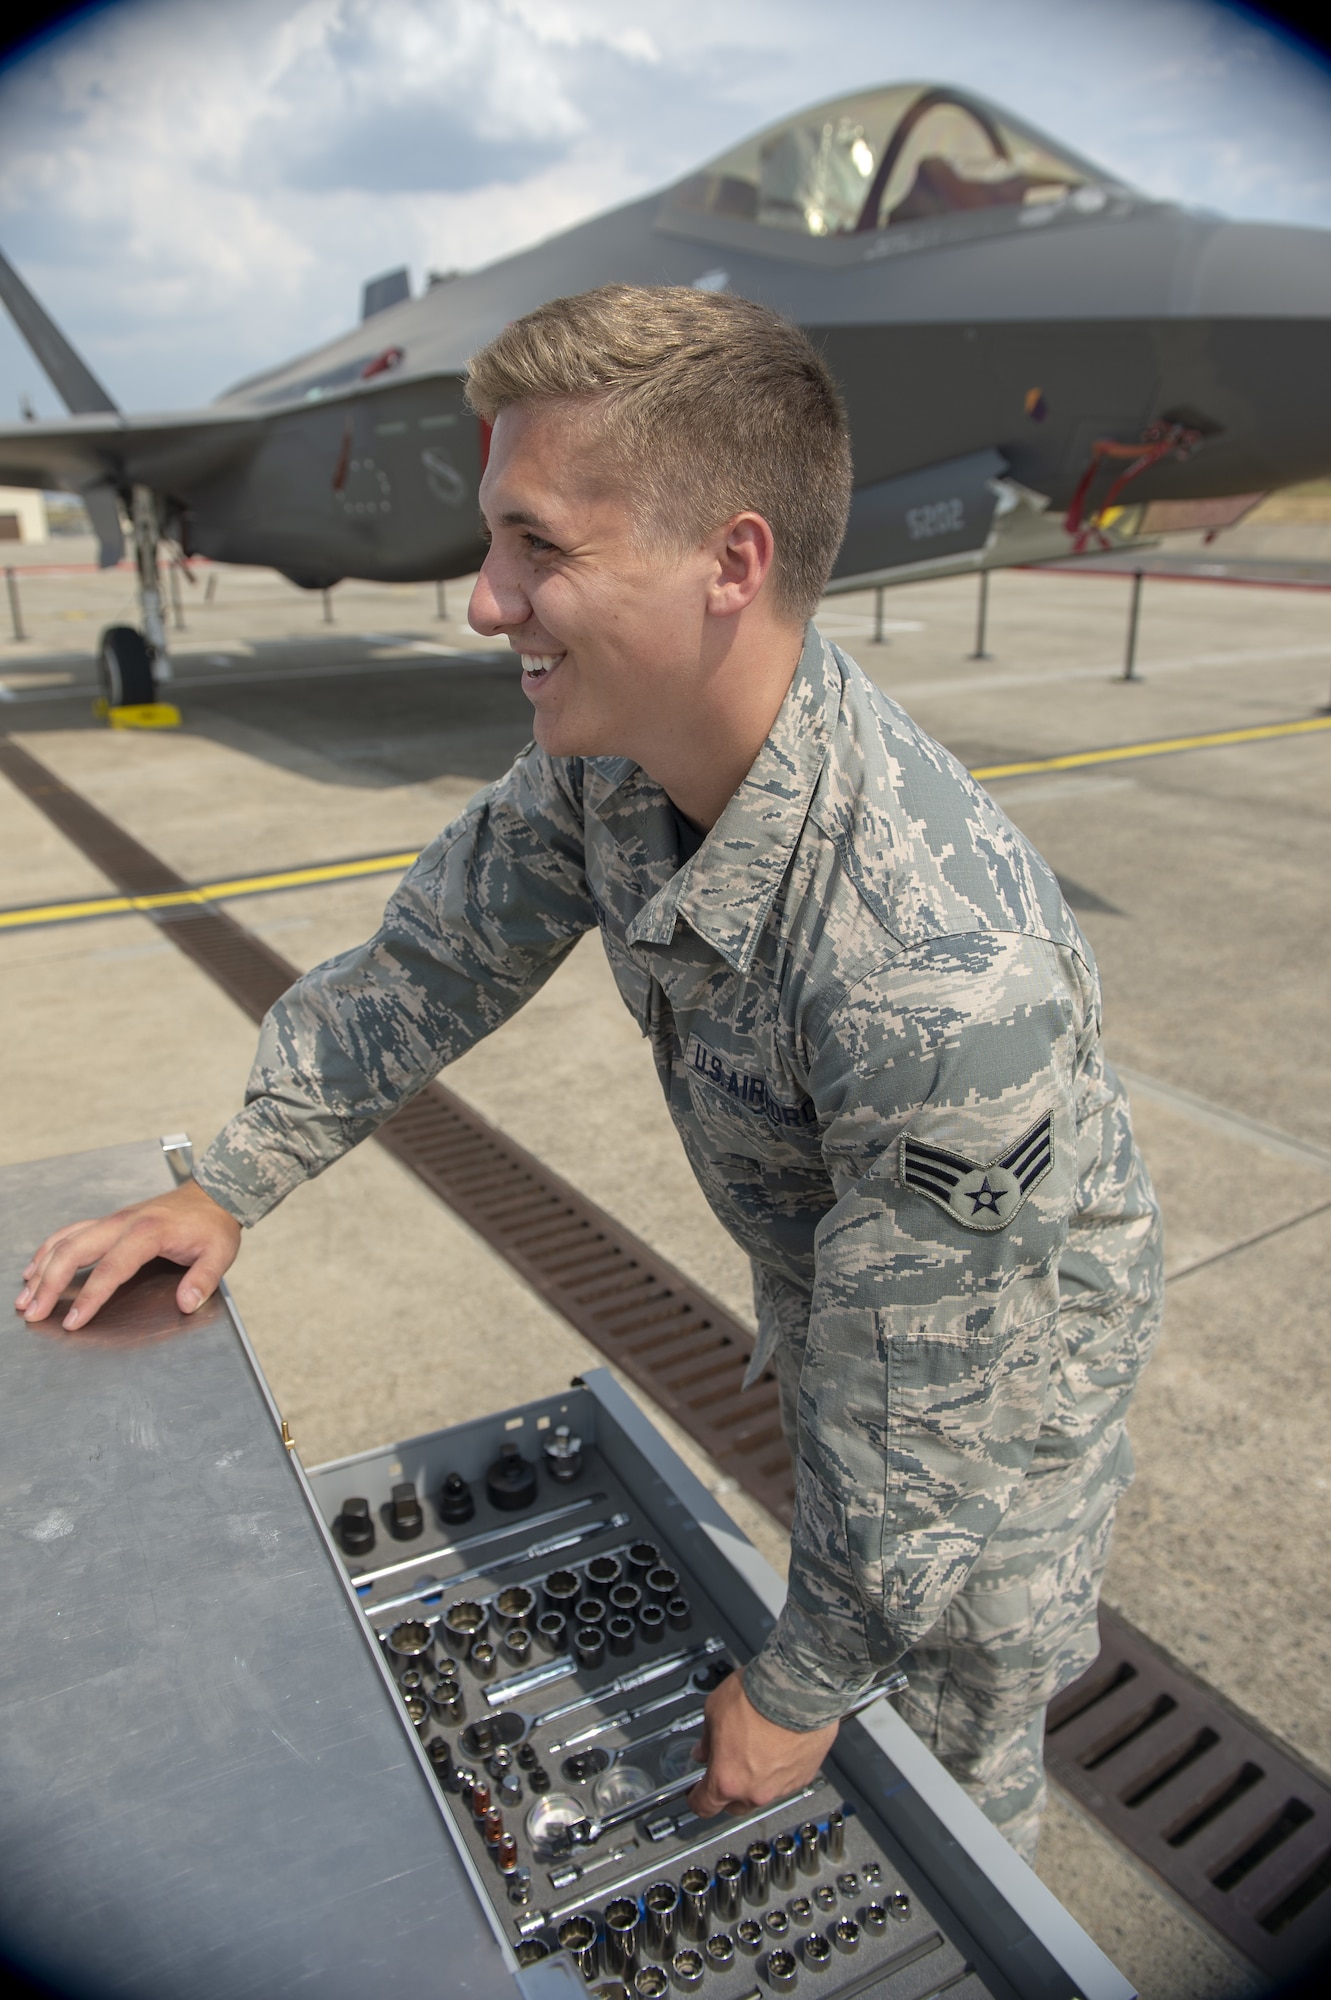 Senior Airman Colby Cook, an F-35A Lightning II crew chief assigned to the 419th Fighter Wing, on the flightline July 26, 2019, at Spangdahlem Air Base, Germany. Cook was deployed with his unit to participate in exercises and conduct training with other Europe-based aircraft as part of a Theater Security Package. (U.S. Air Force photo by Airman 1st Class Branden Rae)